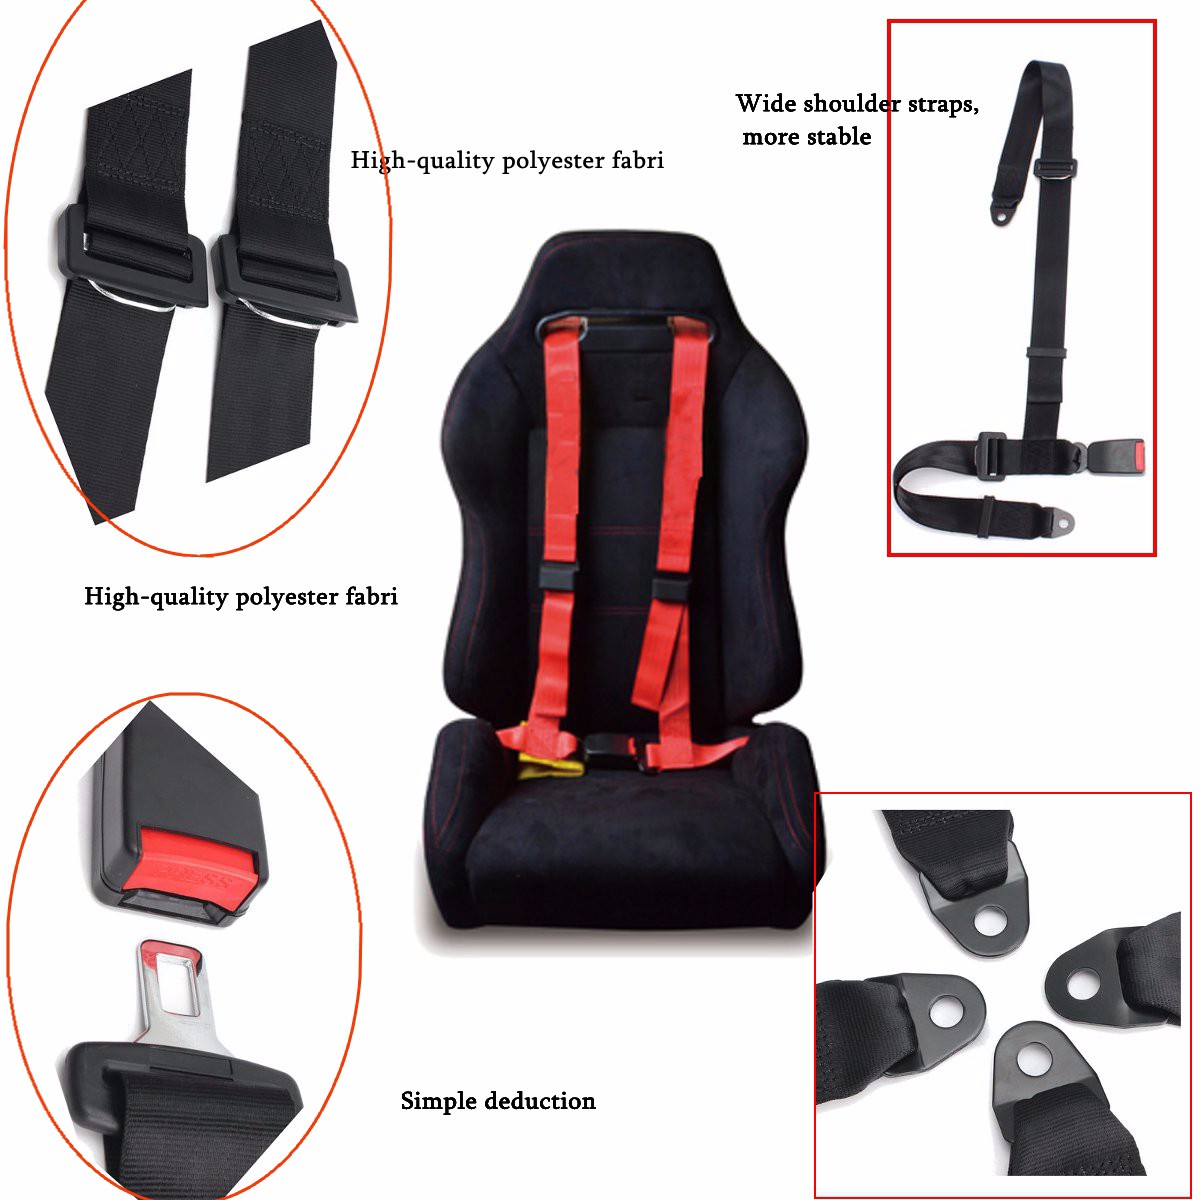 Sport racing car harness safety seatbelt 3 4 point fixing mounting quick release